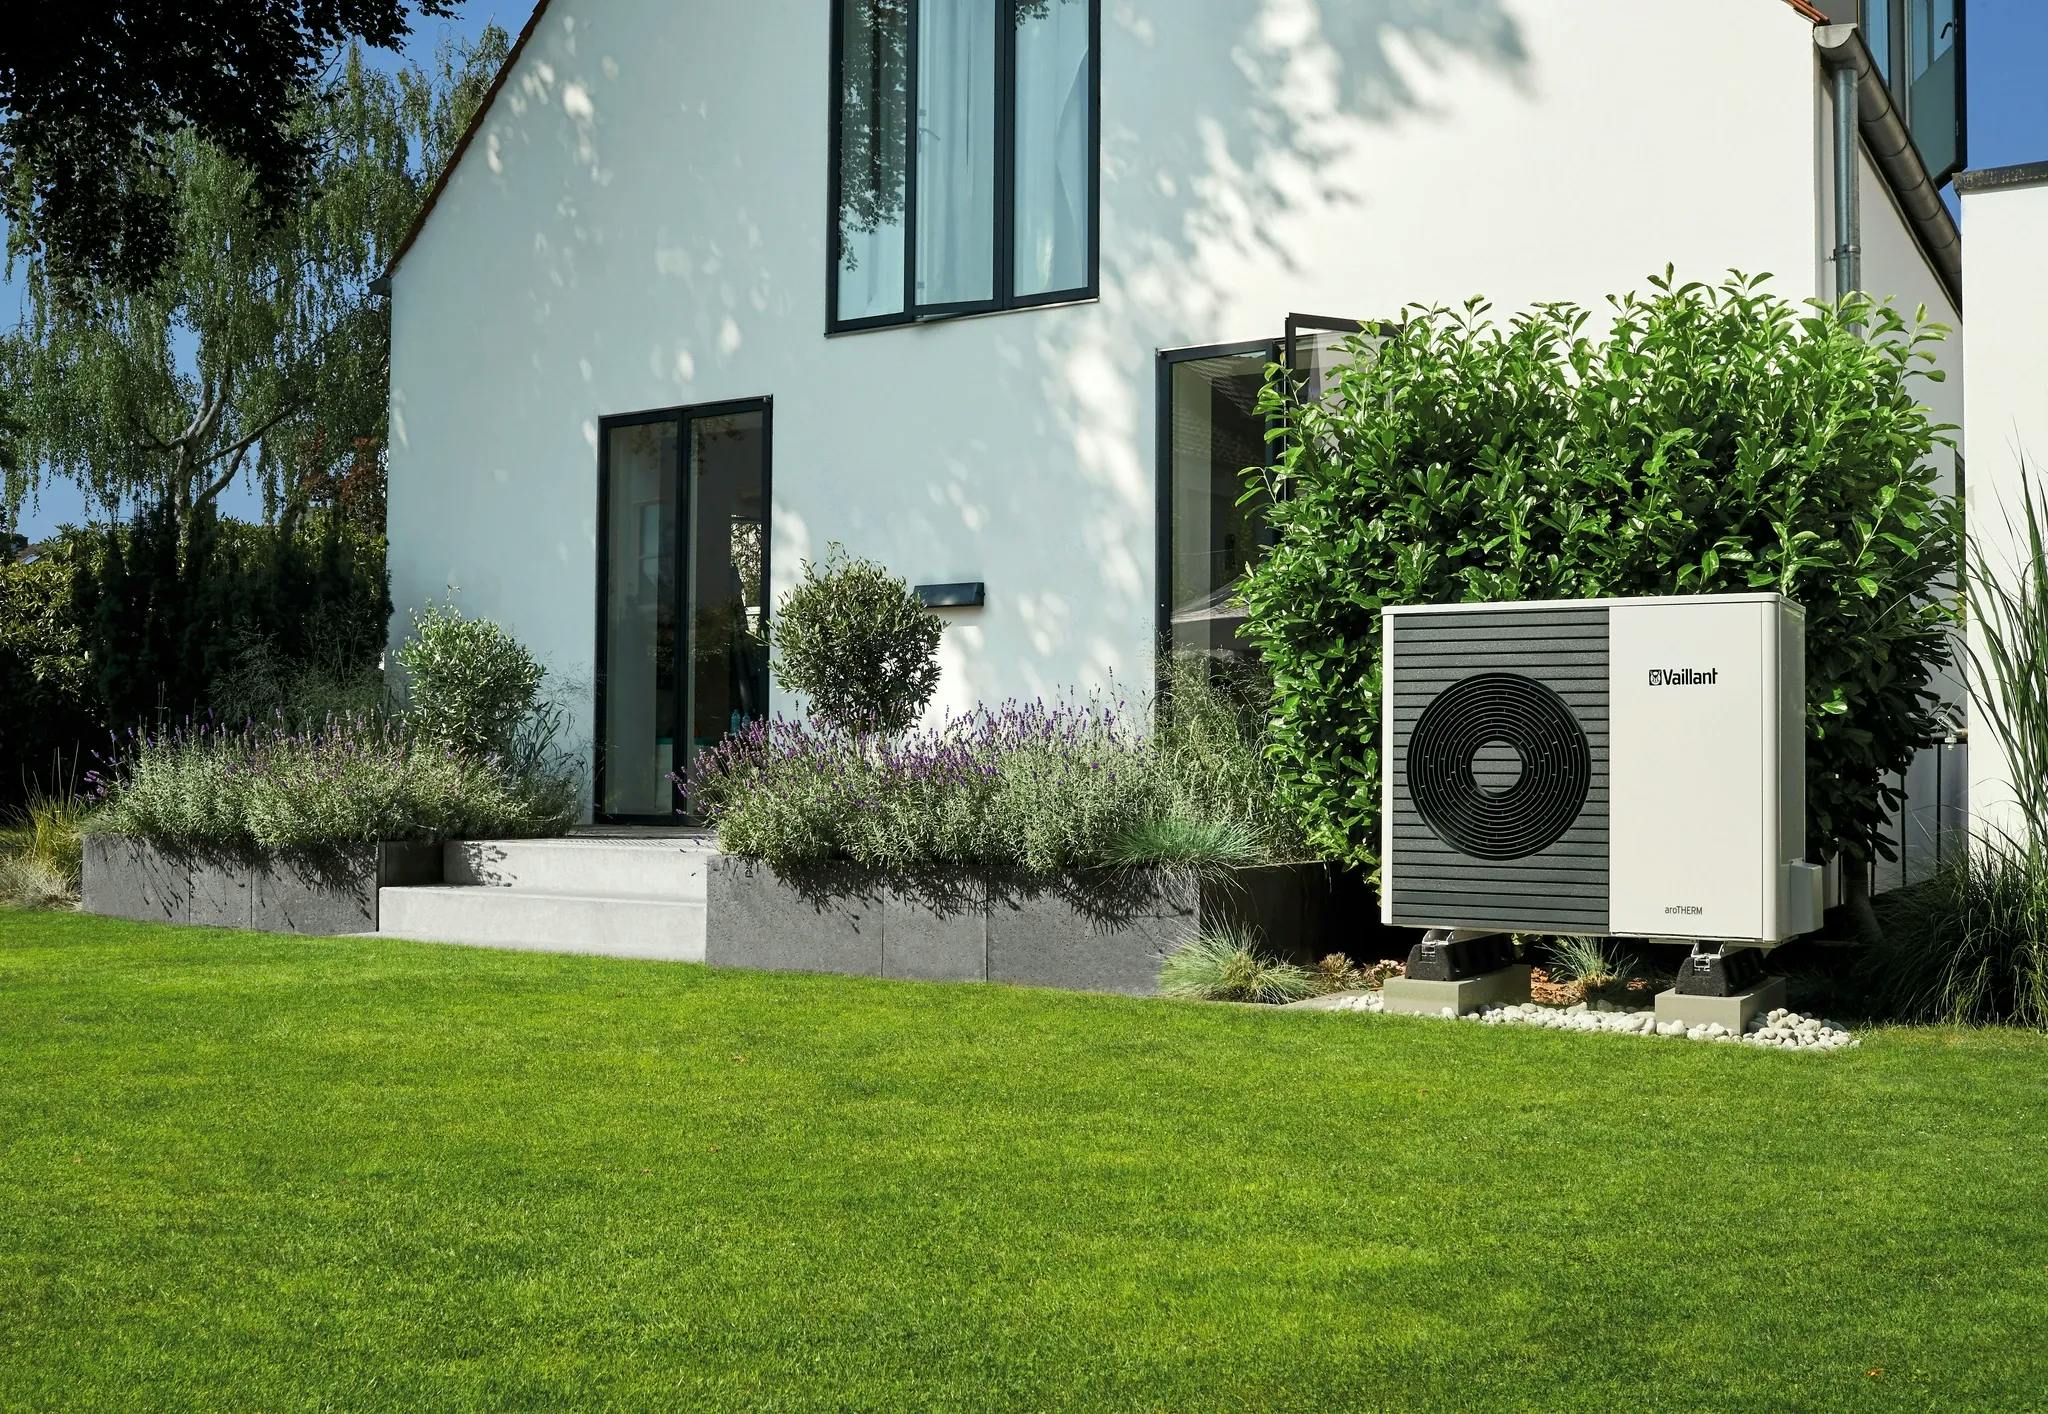 `Air to water Vaillant aroTherm heat pump in the garden of a white house